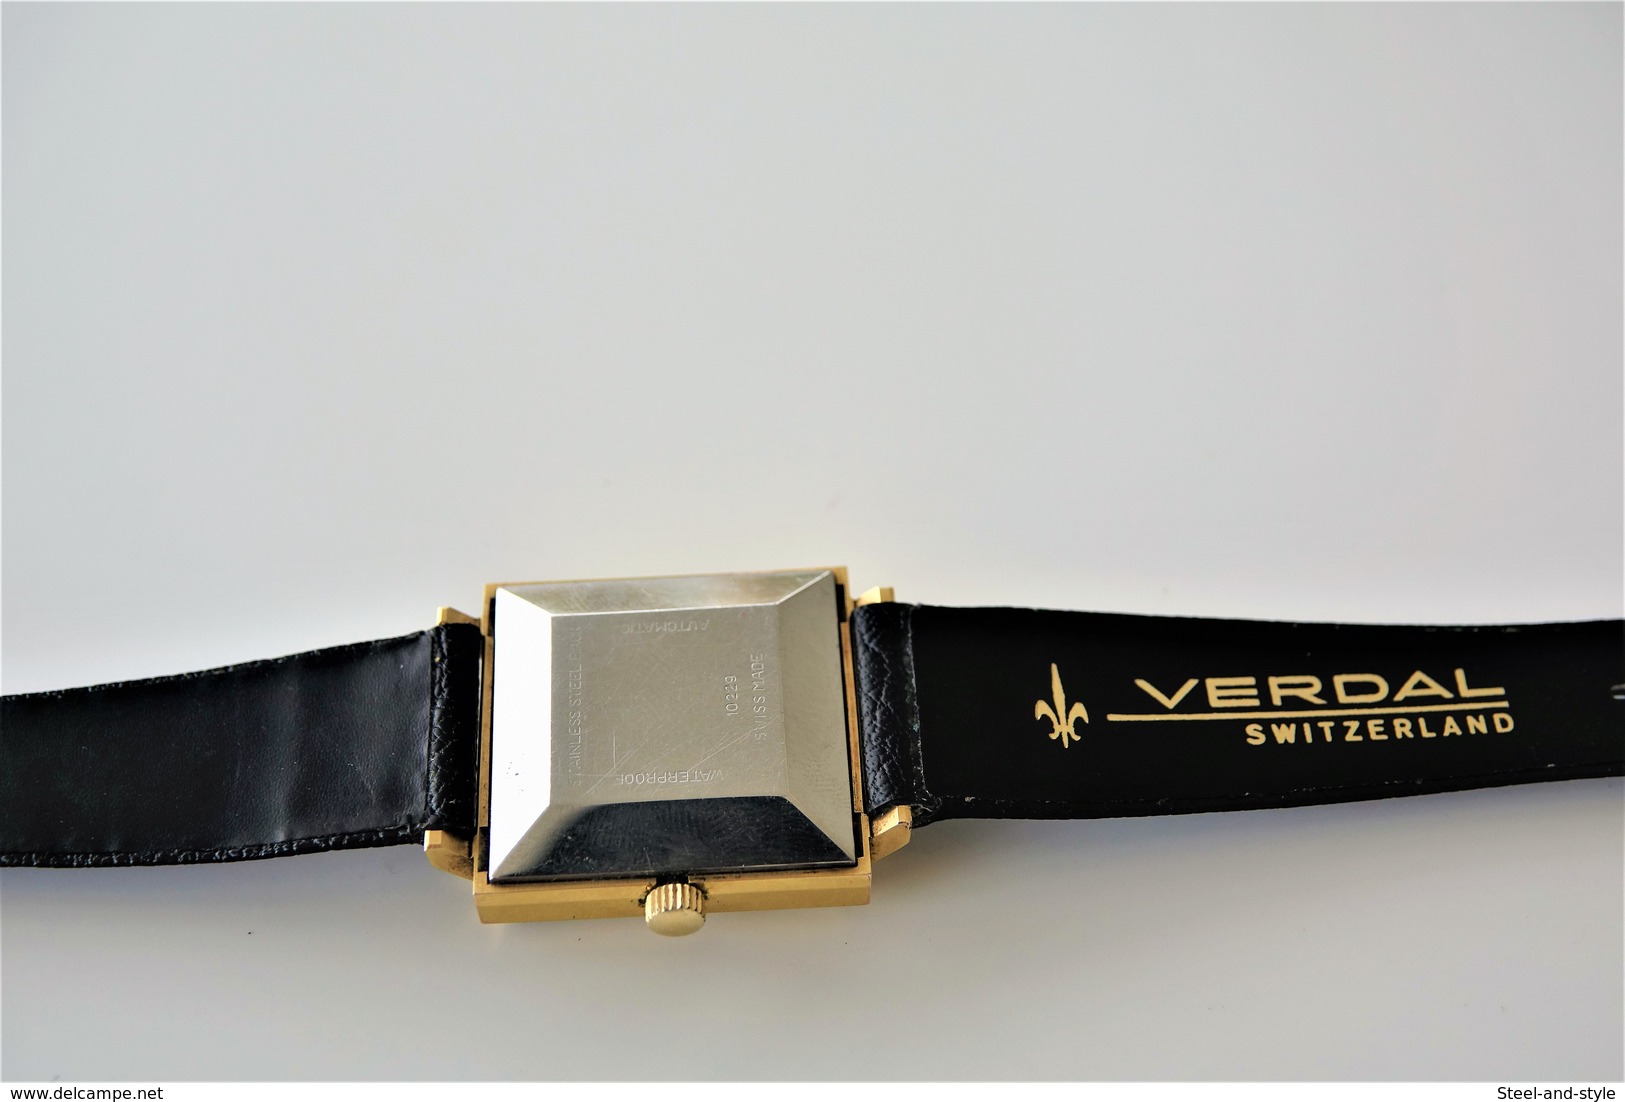 watches : VERDAL TIME-DATE AUTOMATIC RaRe with original box - 20 microns gold plated - original - running - 1970s